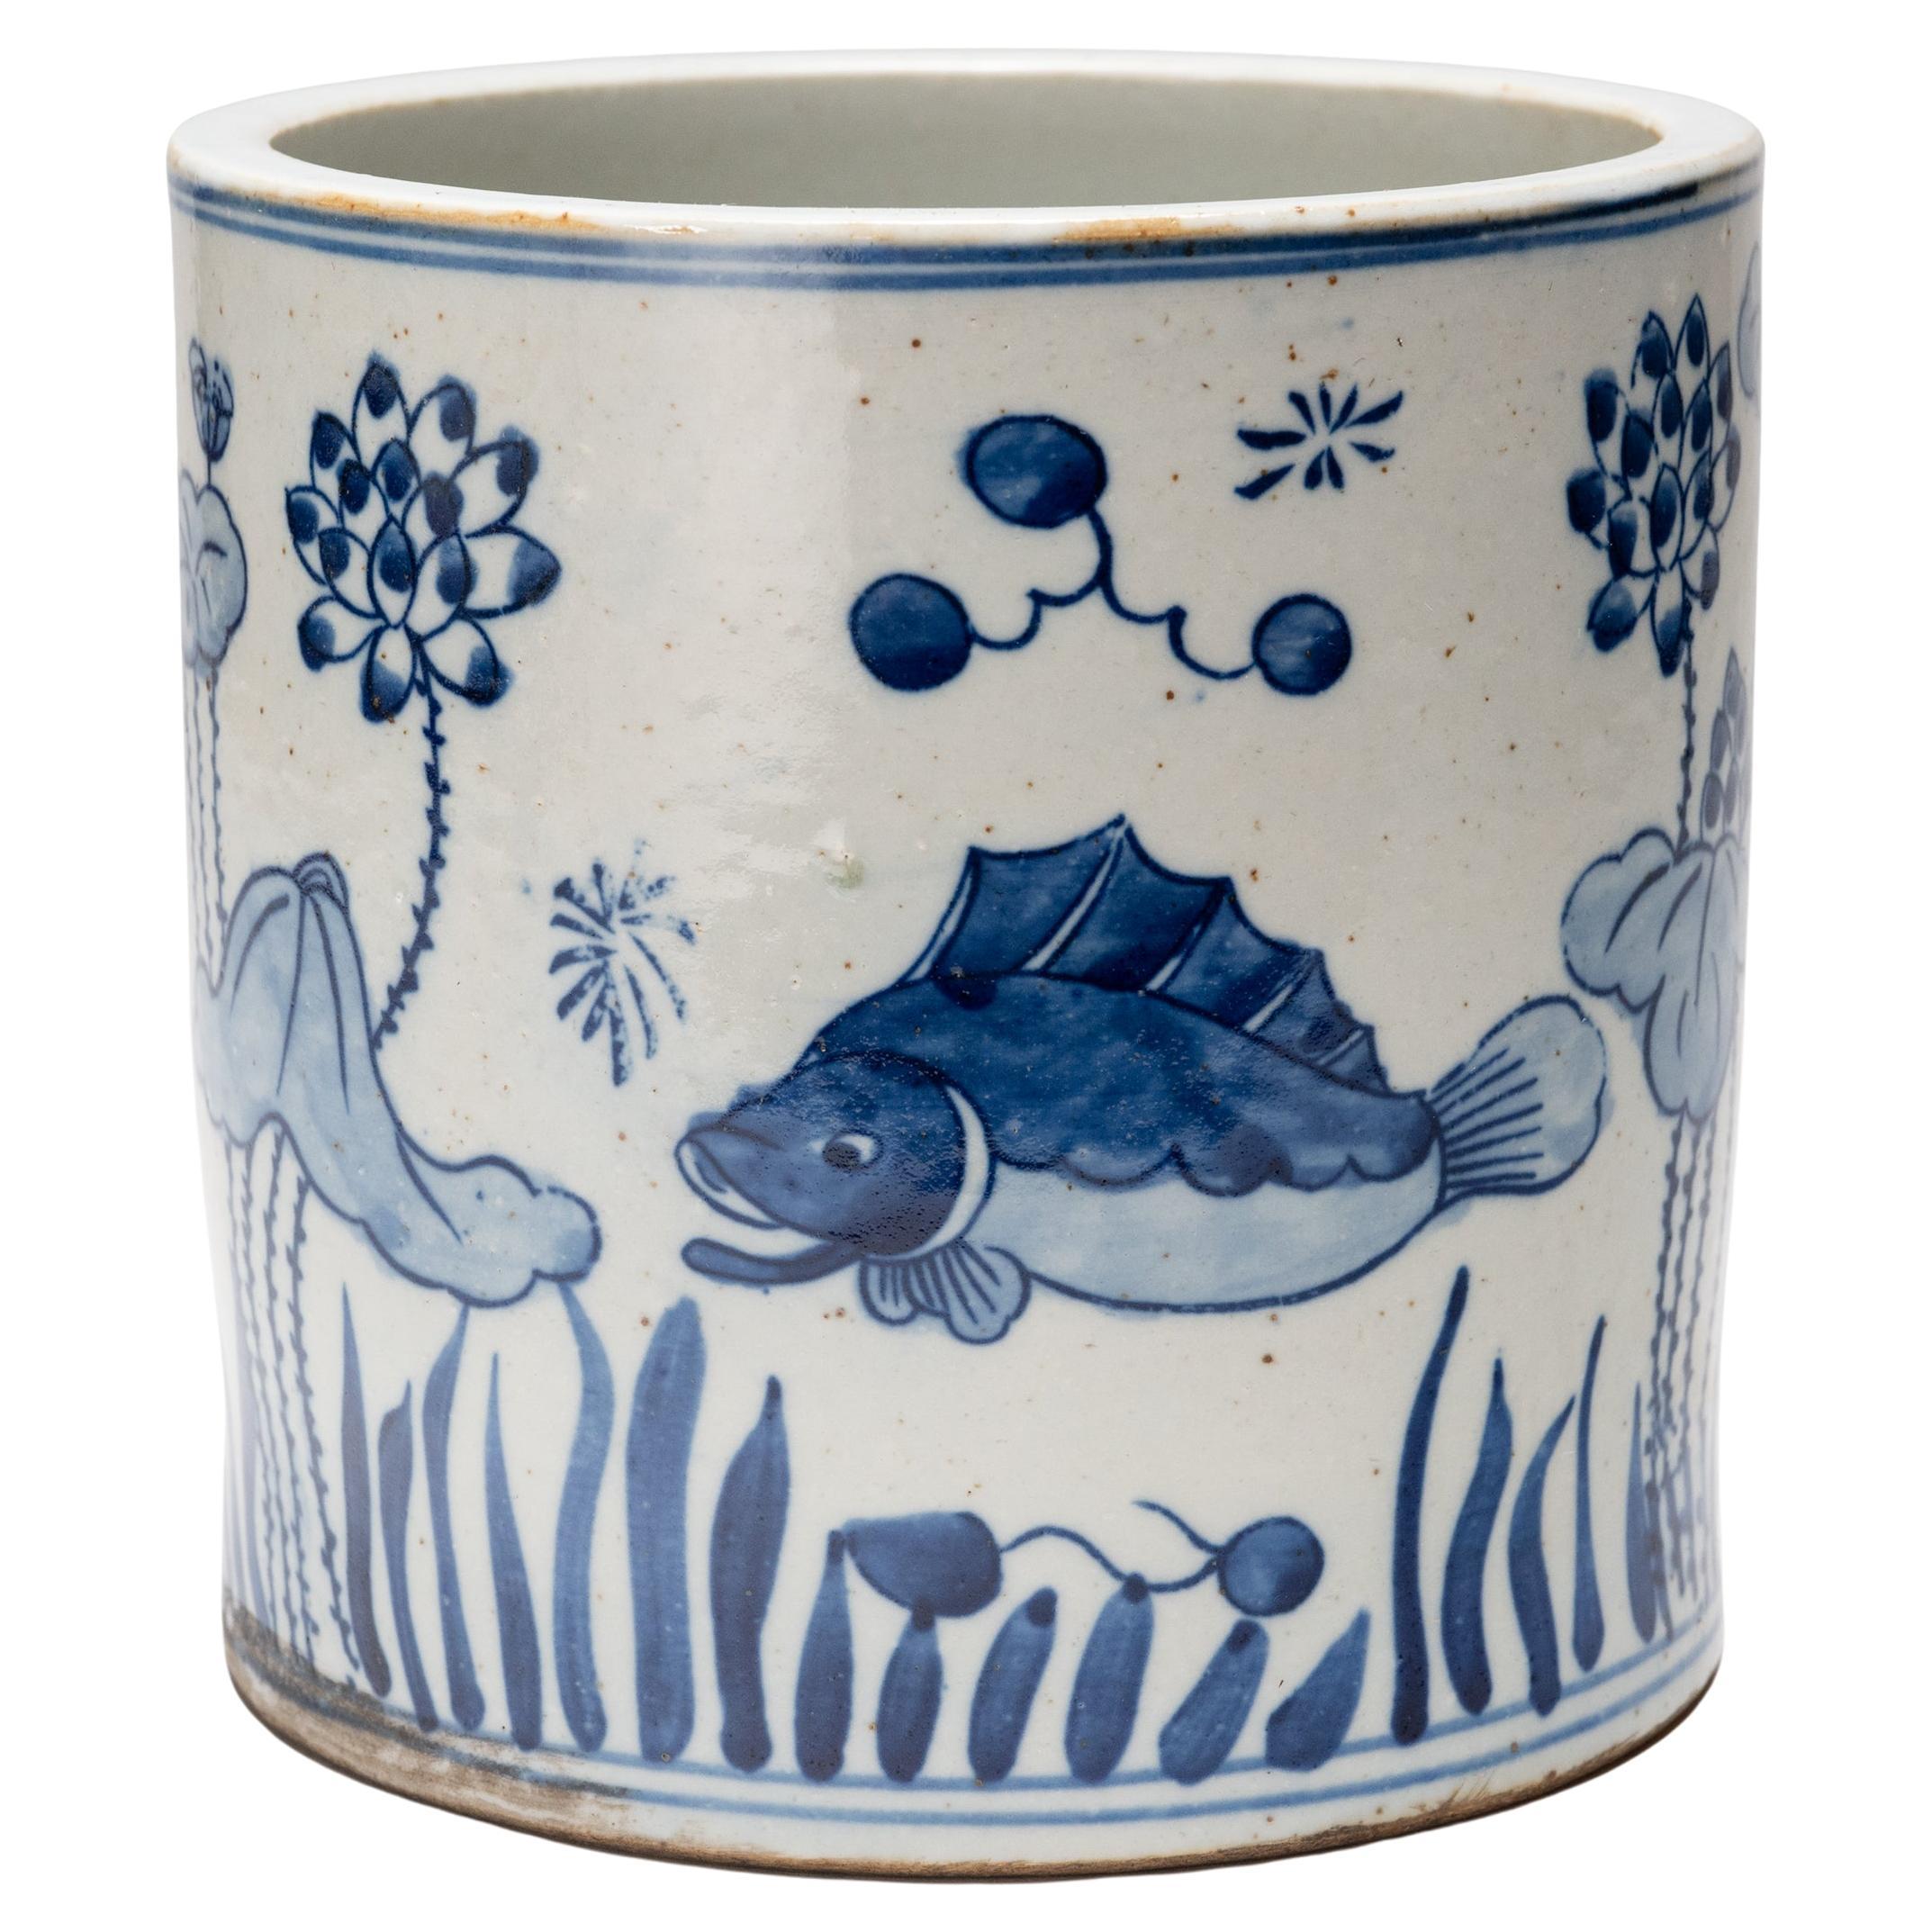 Blue and White Brush Pot with Fish & Flora